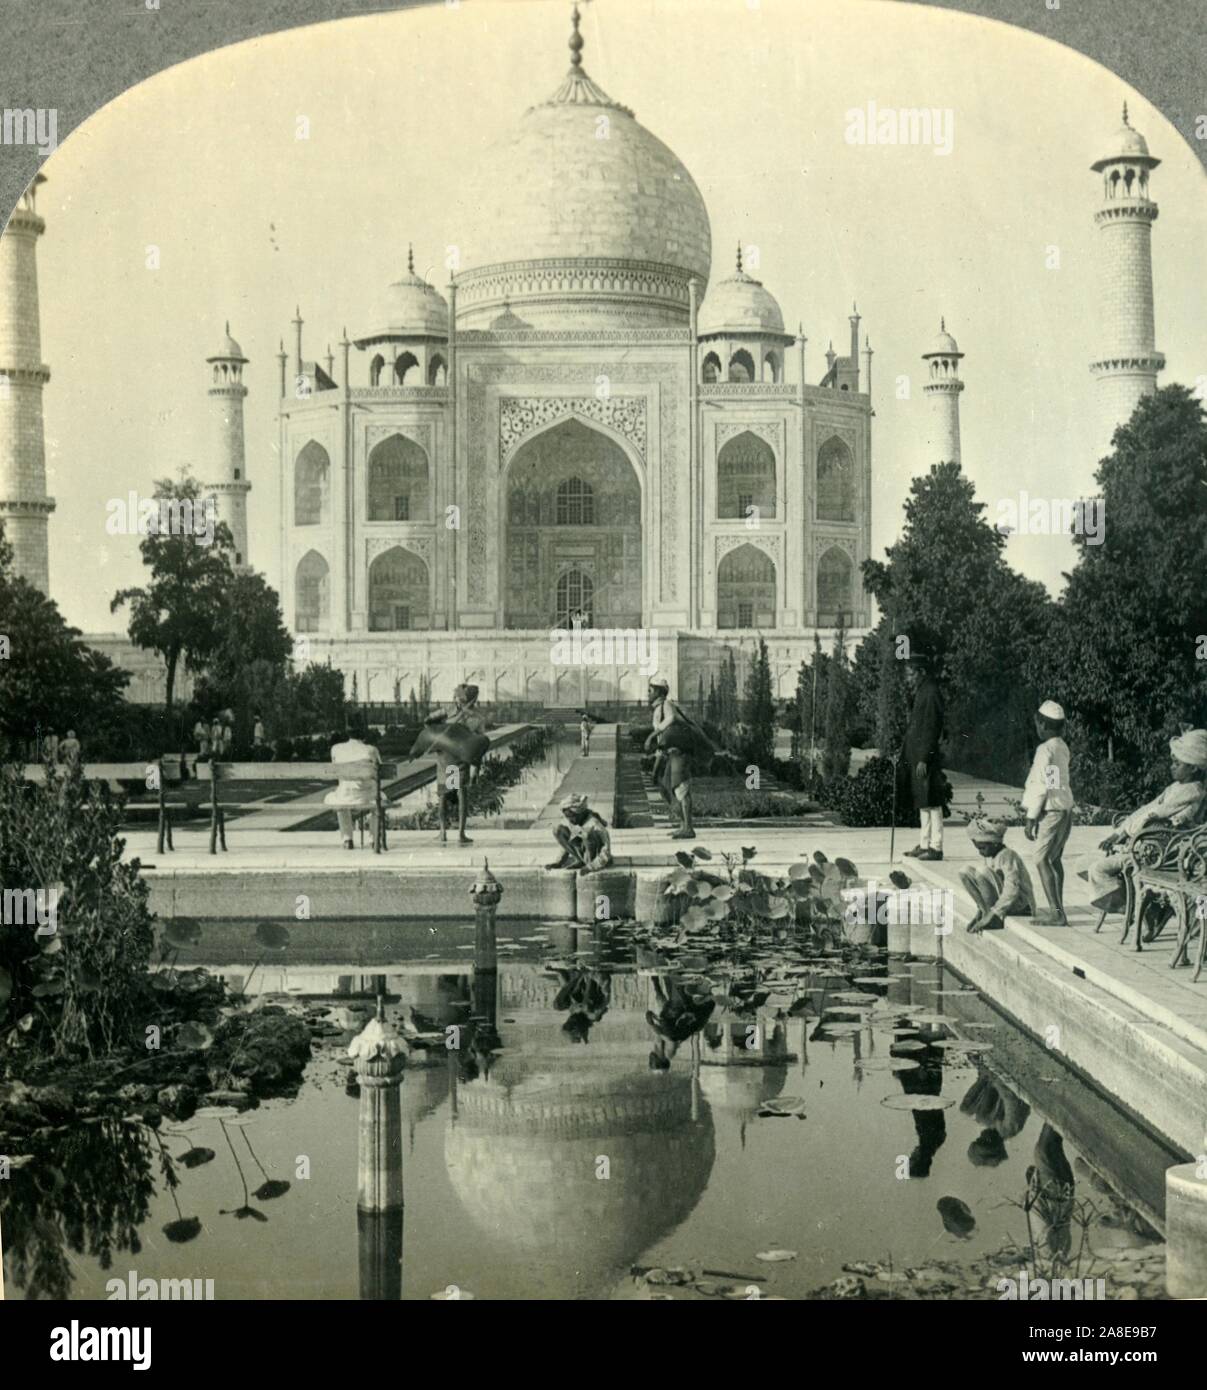 'The Taj Majal, Agra, India', c1930s. Mausoleum in Agra commissioned in 1632 by Shah Jahan to house the tomb of his favourite wife, Mumtaz Mahal, designated as a UNESCO World Heritage Site in 1983. From &quot;Tour of the World&quot;. [Keystone View Company, Meadville, Pa., New York, Chicago, London] Stock Photo